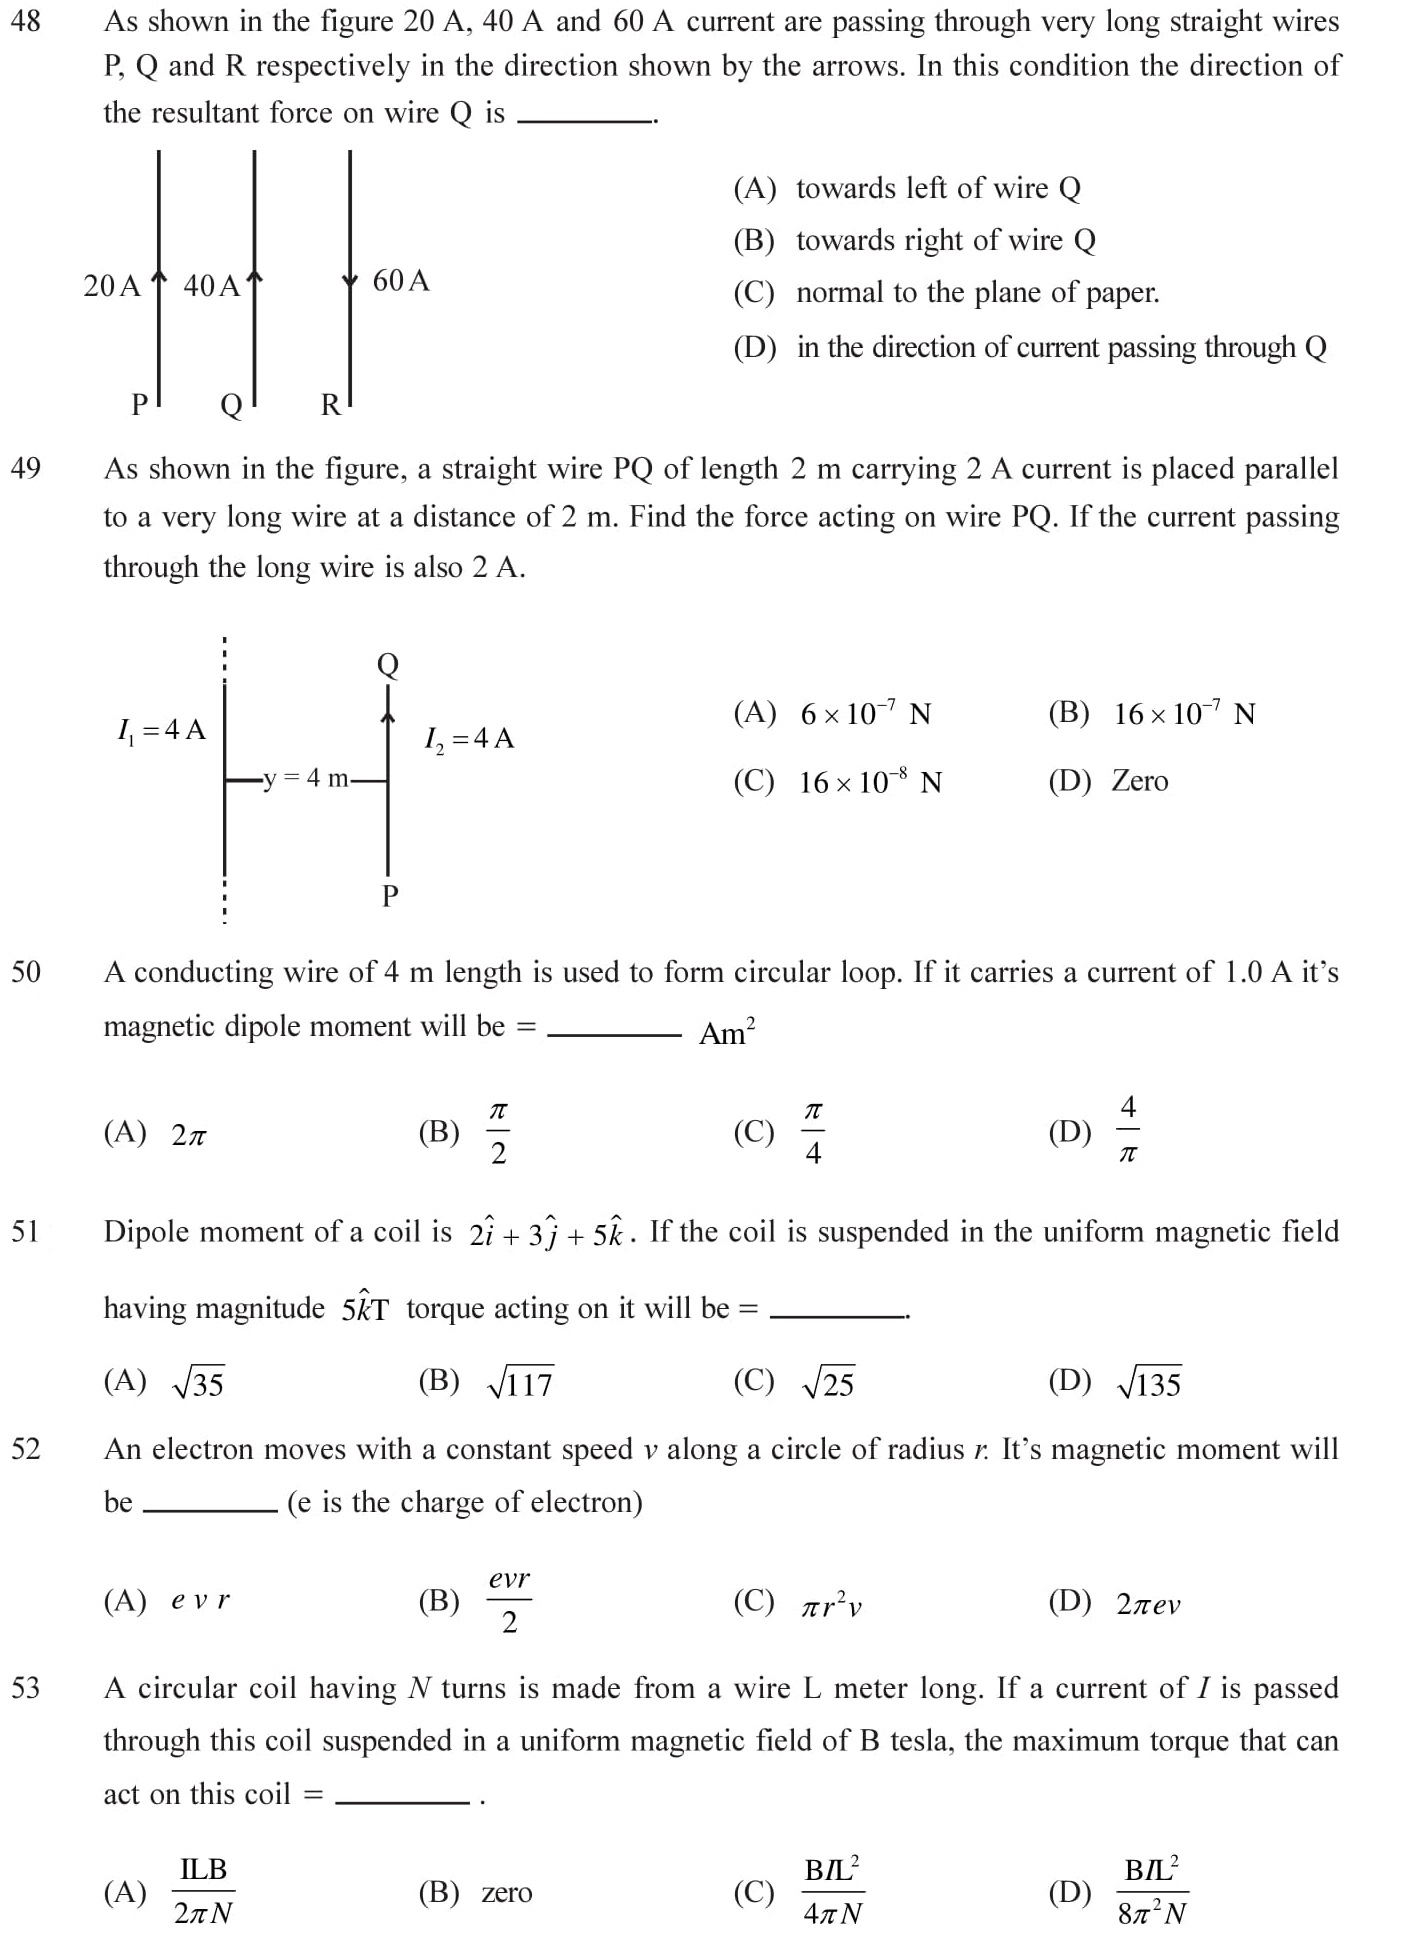 12-Physics-Moving-Charges-Magnetism-NEET-JEE-IIT-Questions-Topic-9